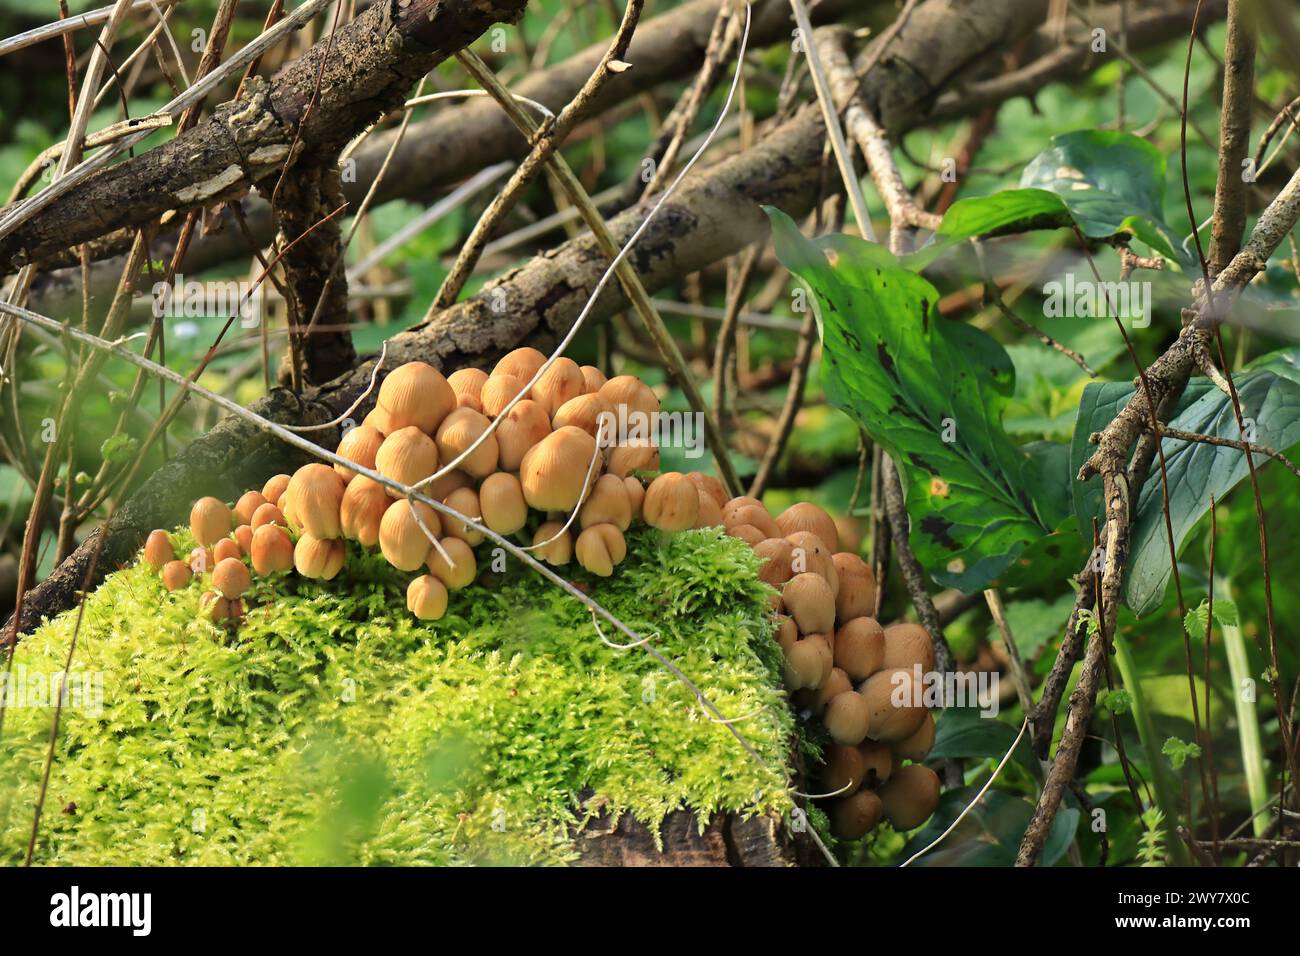 Fungus growing beside a tangle of branches. Early spring view of woodland in Gosport, Hampshire, Southern England. Stock Photo